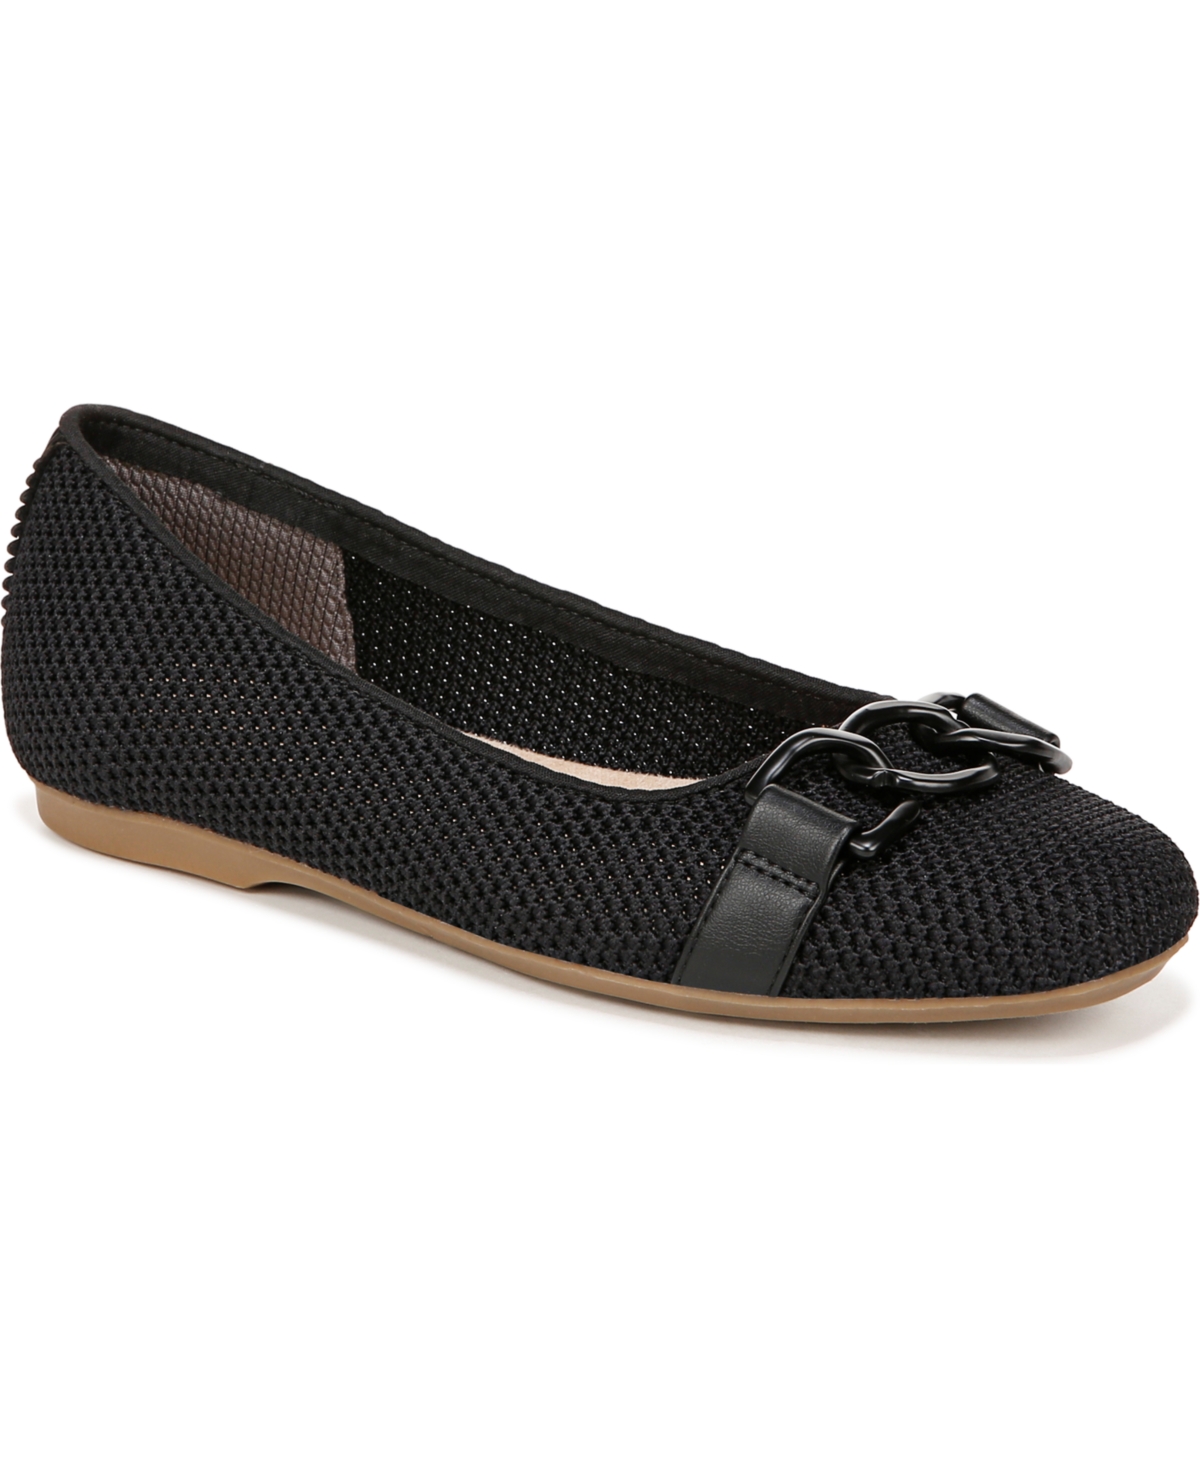 Dr. Scholl's Women's Wexley Adorn Flats In Black Knit Fabric,faux Leather